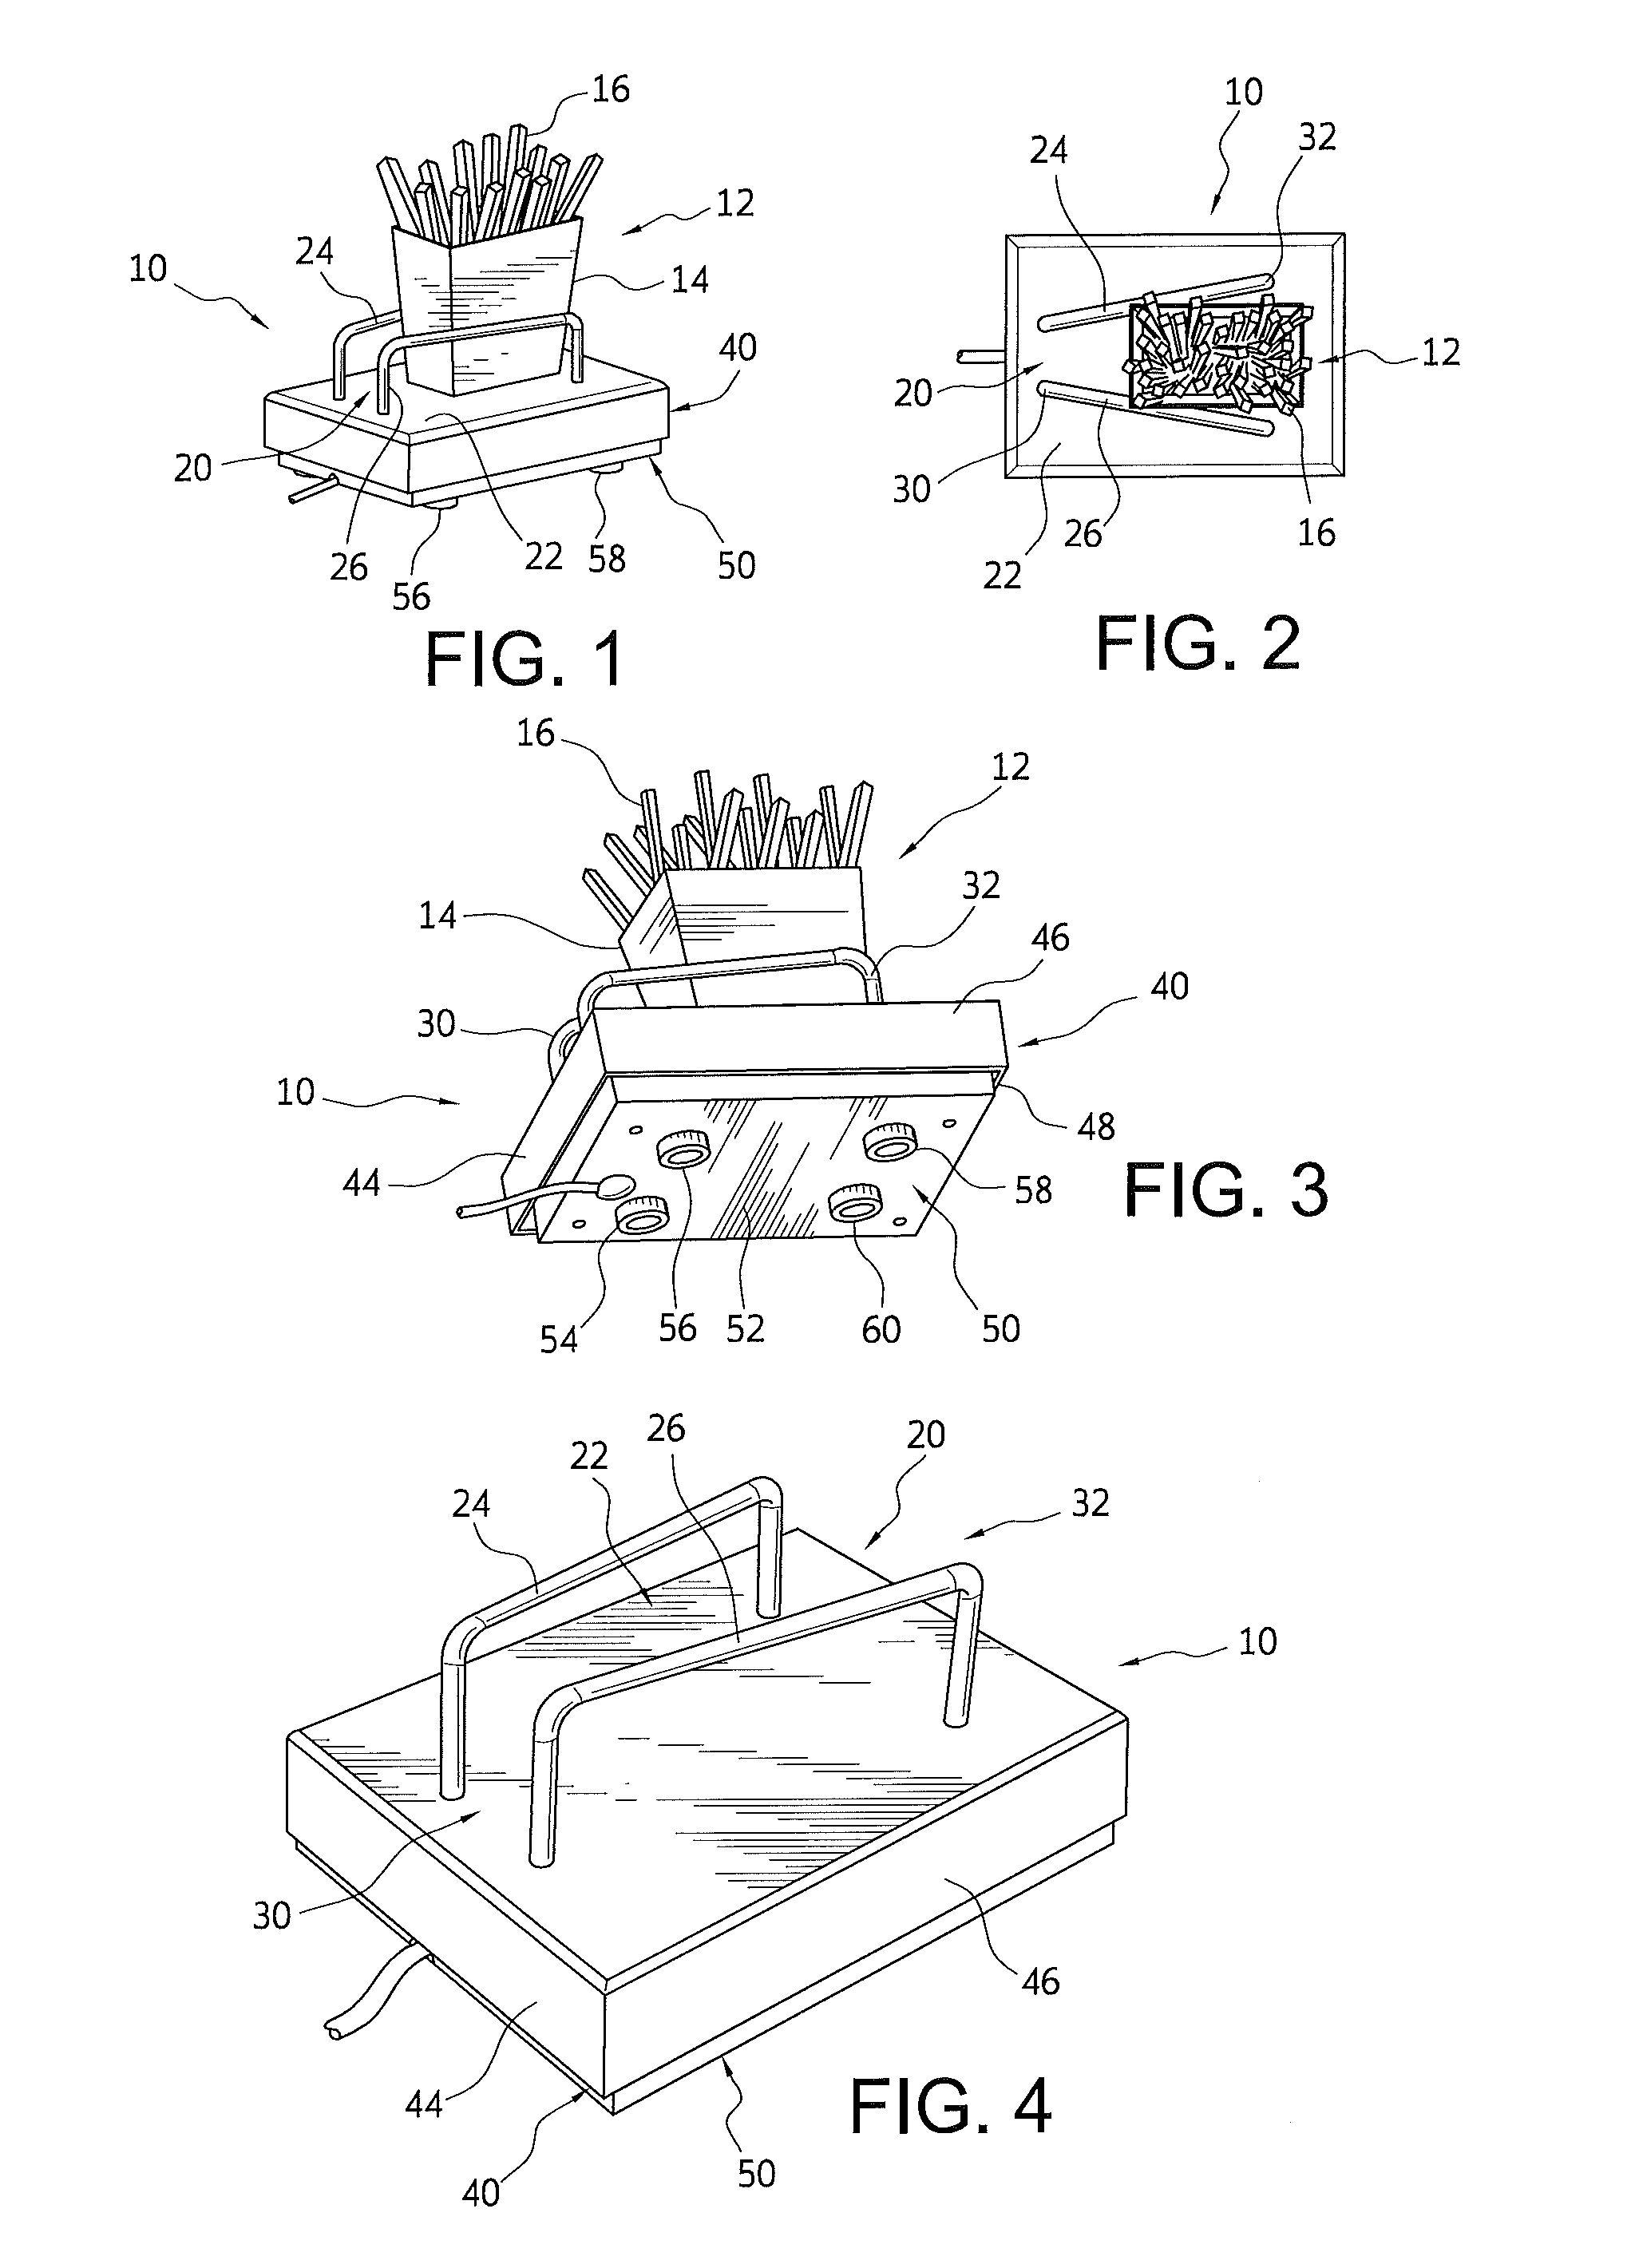 Cup-Holding Repositionable Food Scale Weight Sensing System, Fry Ribbon Bridge Assembly And Method